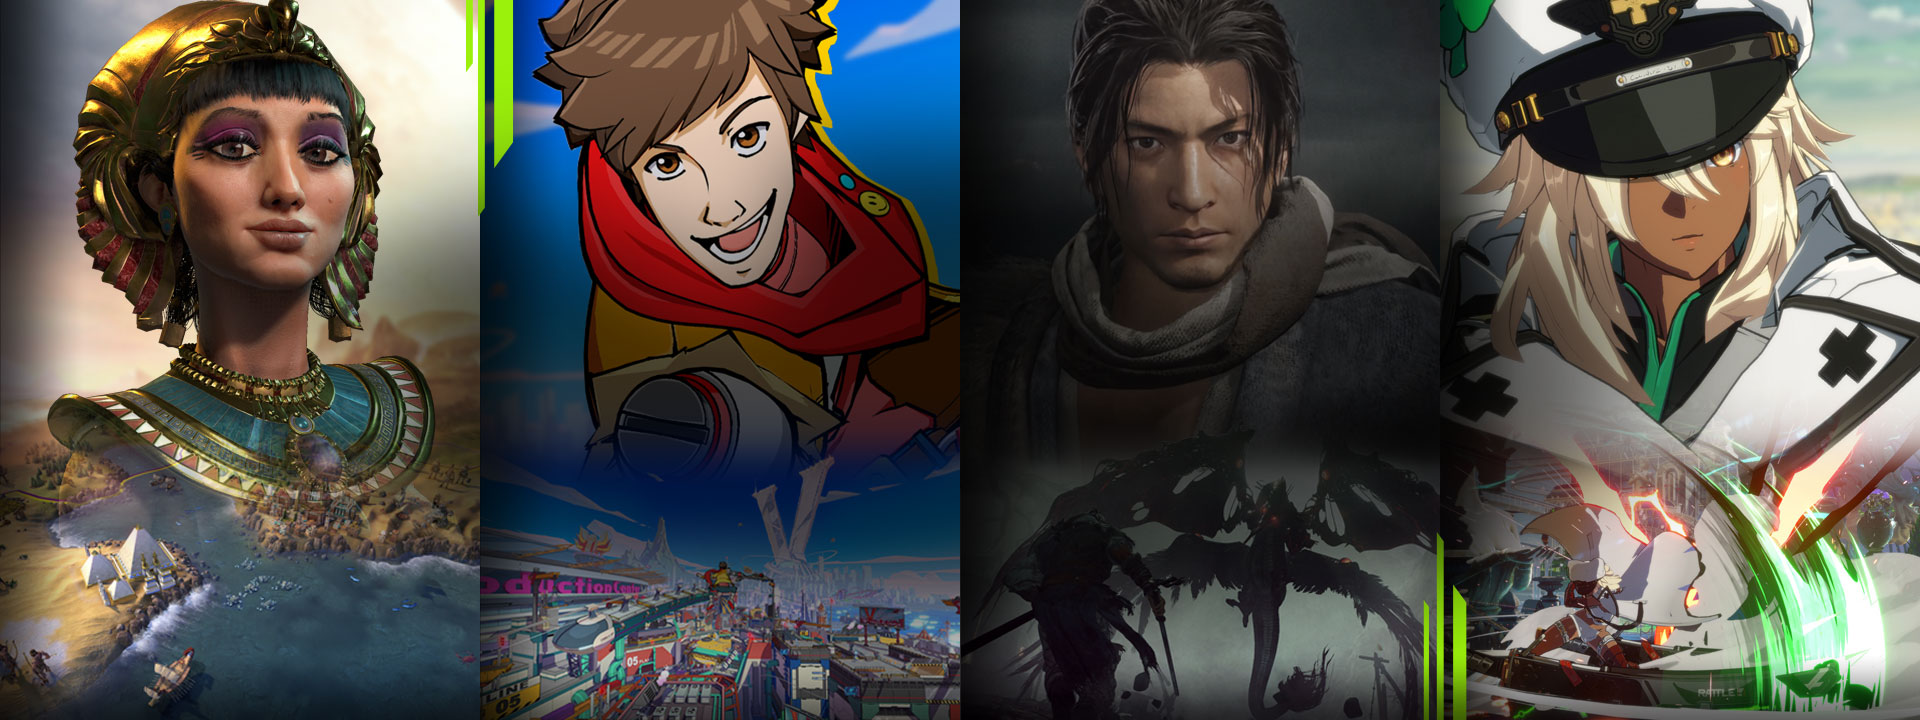 A selection of games available with PC Game Pass including Sid Meier's Civilization VI, Hi-Fi Rush, Wo Long: Fallen Dynasty and Guilty Gear Strive.